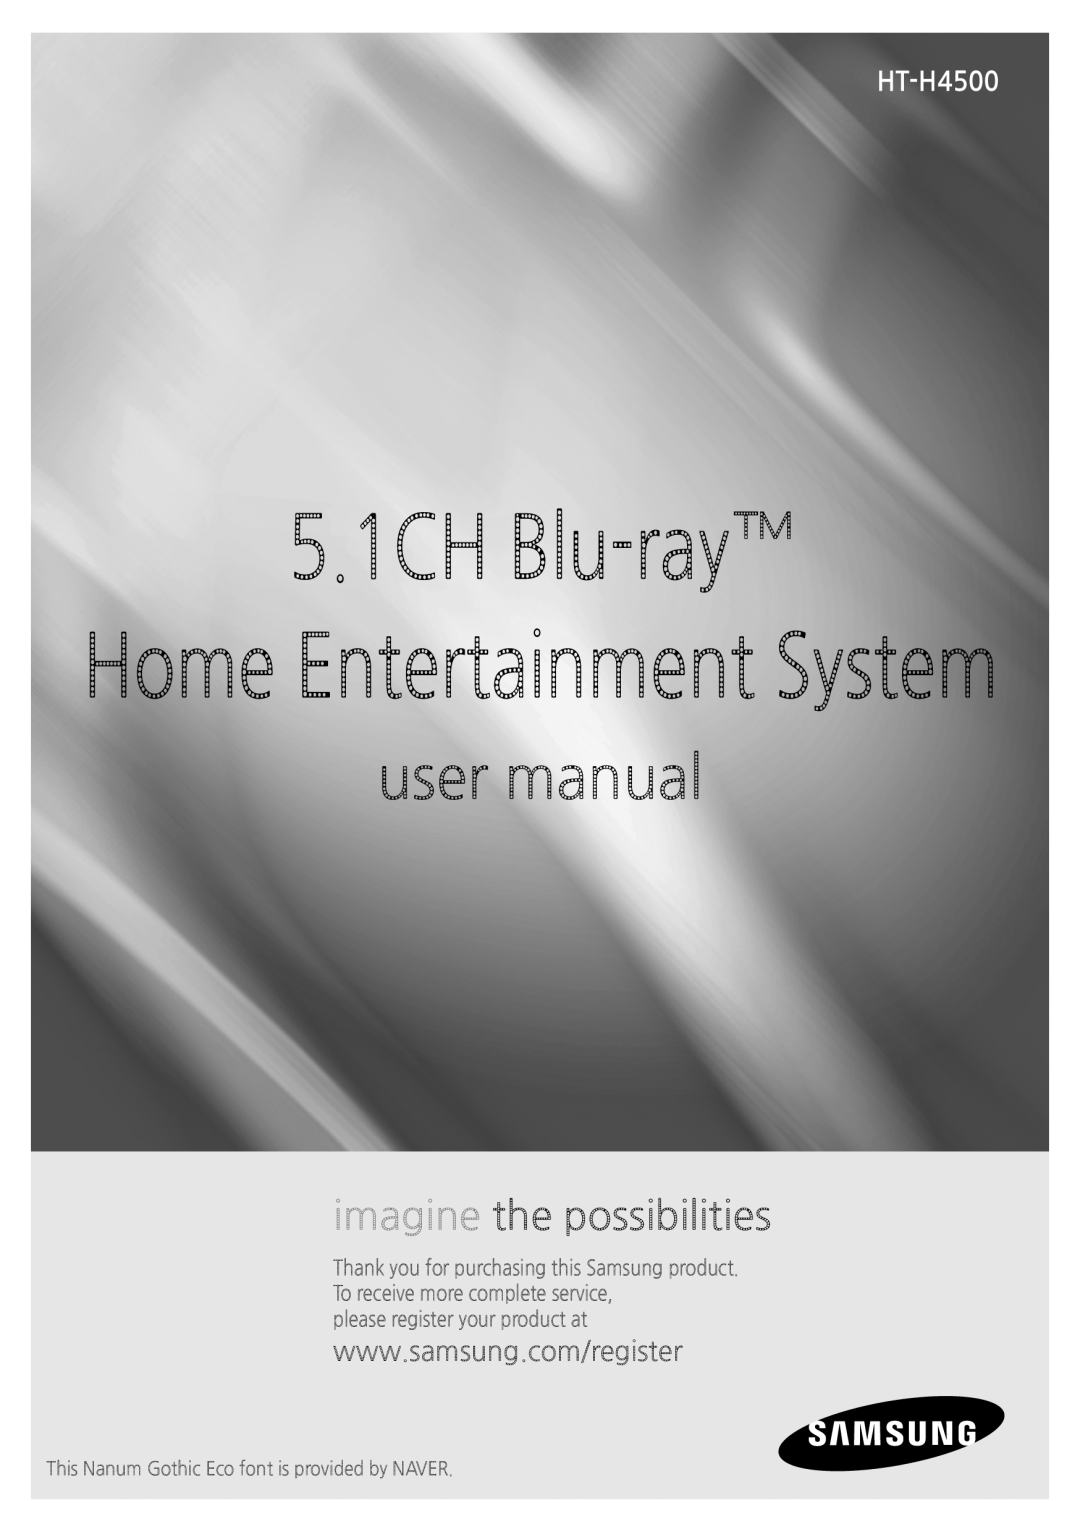 Samsung HT-H4500 user manual 5.1CH Blu-ray, Home Entertainment System, imagine the possibilities 